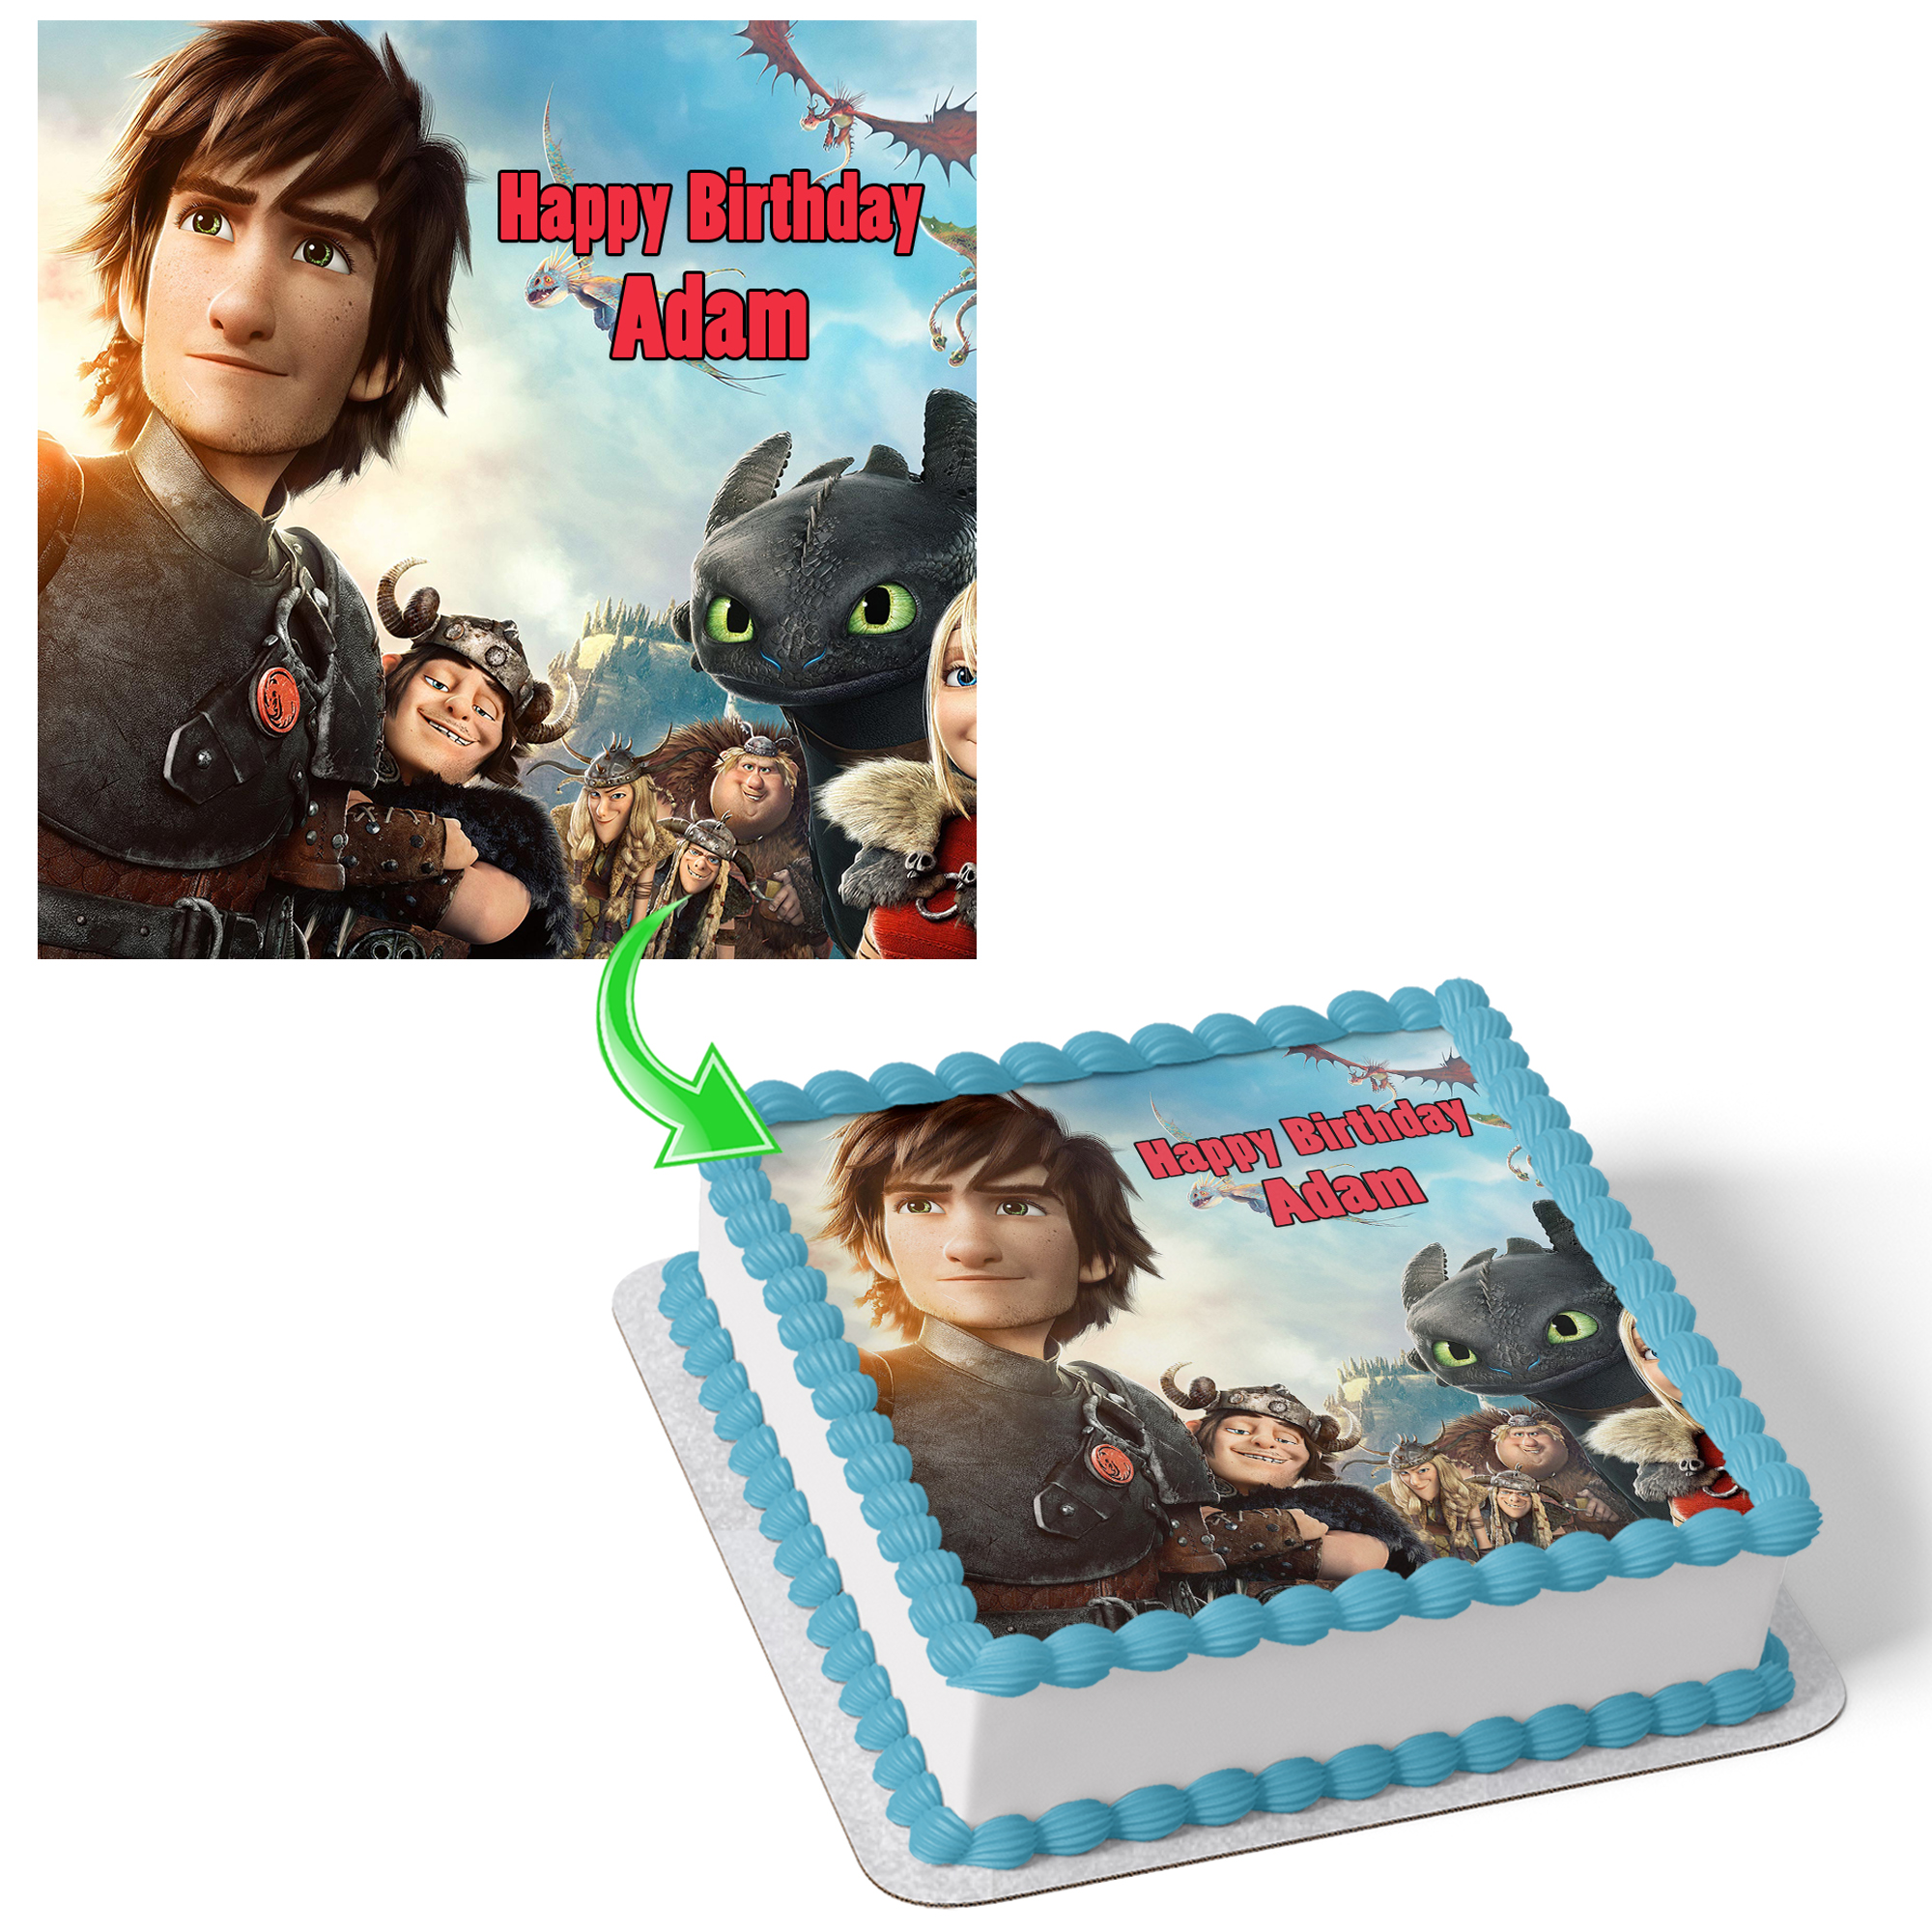 how to train your dragon cake